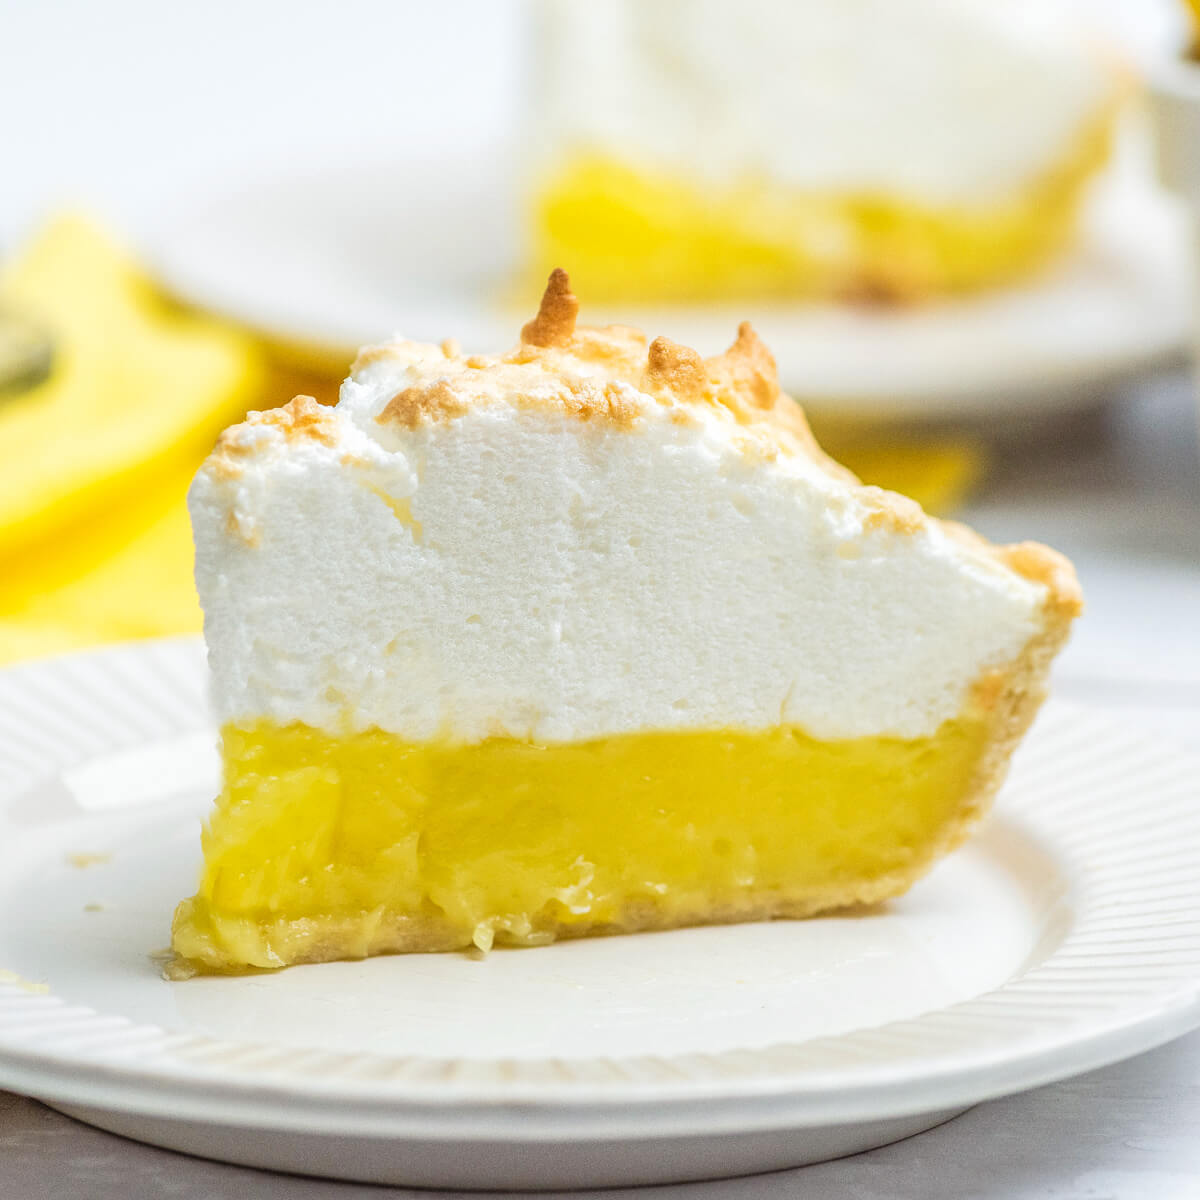 A slice of lemon meringue pie surrounded by lemons and a yellow napkin.